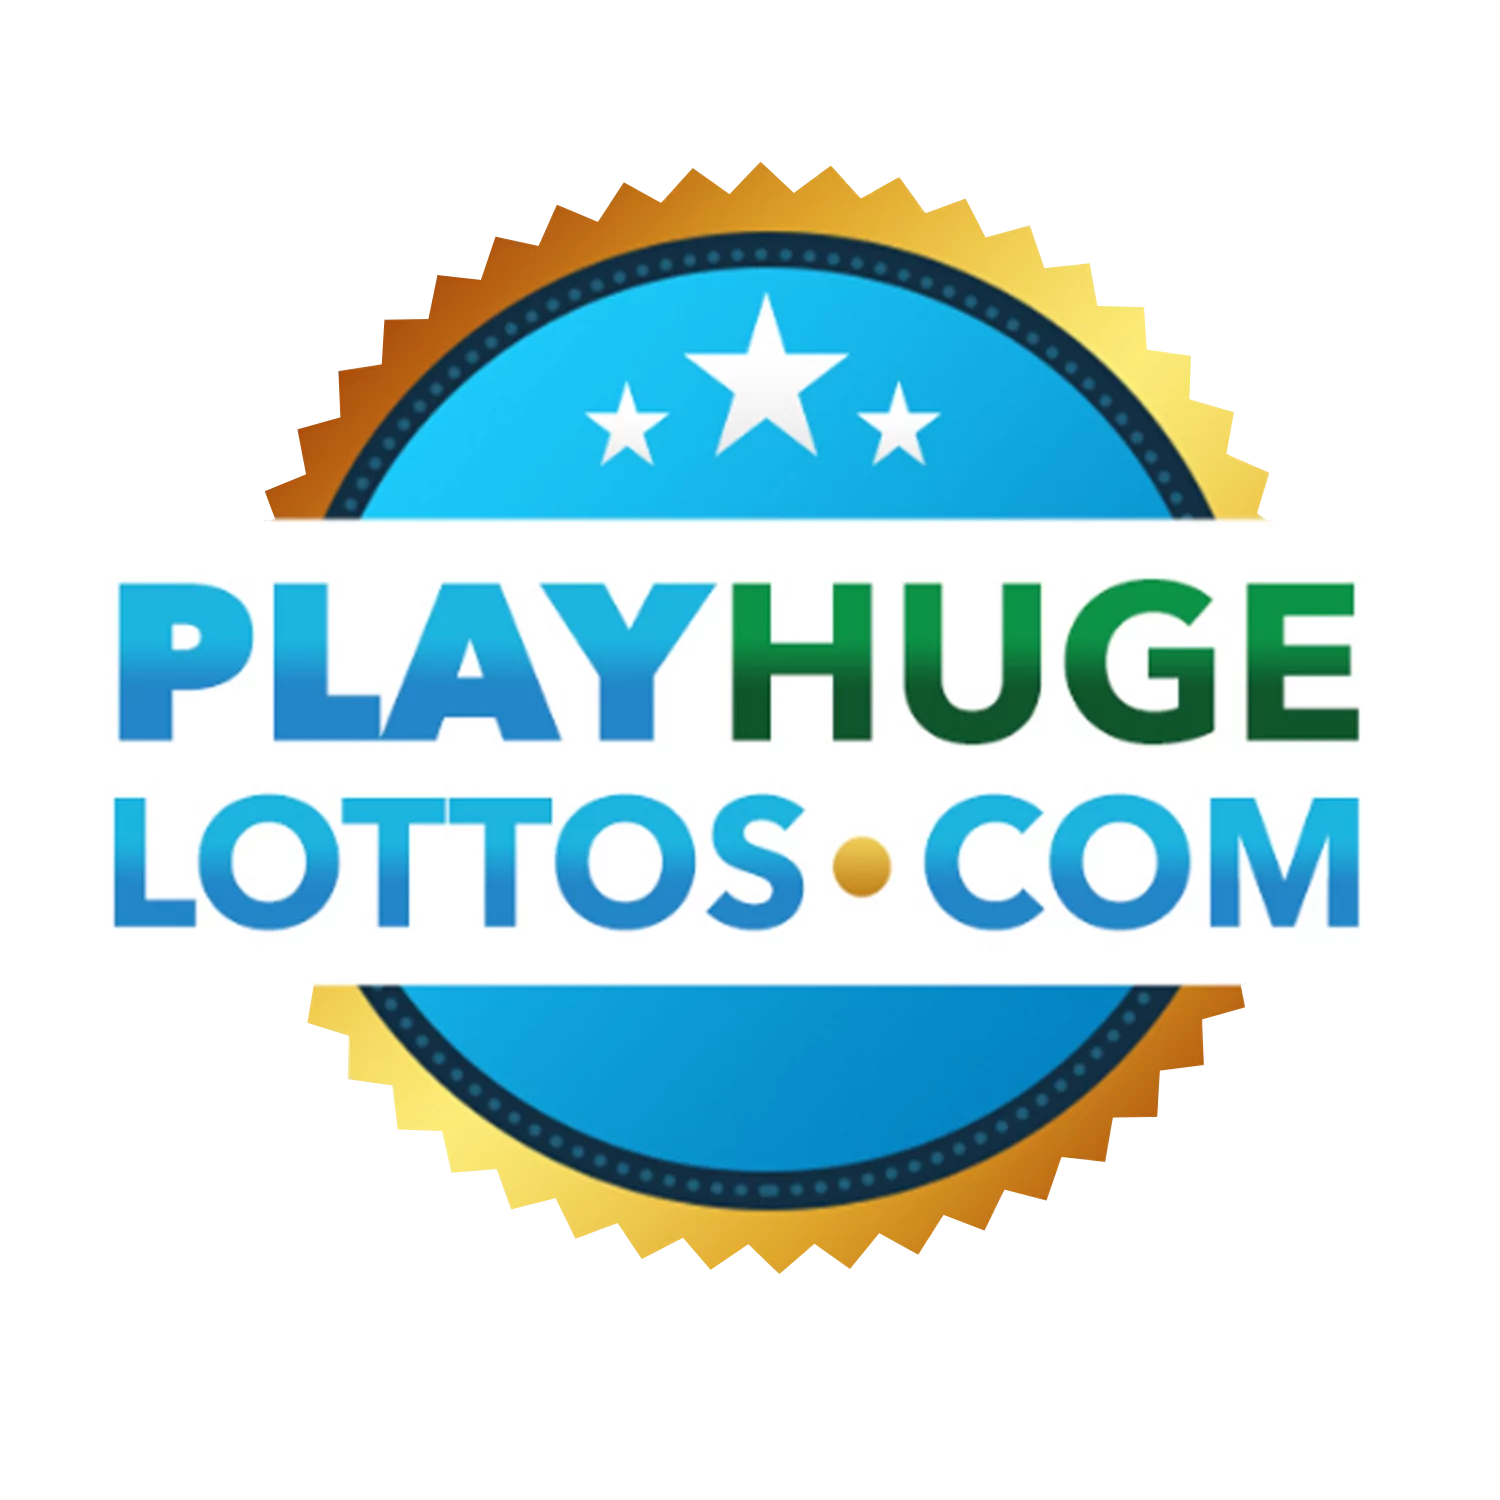 Learn about playing lotteries on the PlayHugeLottos site.